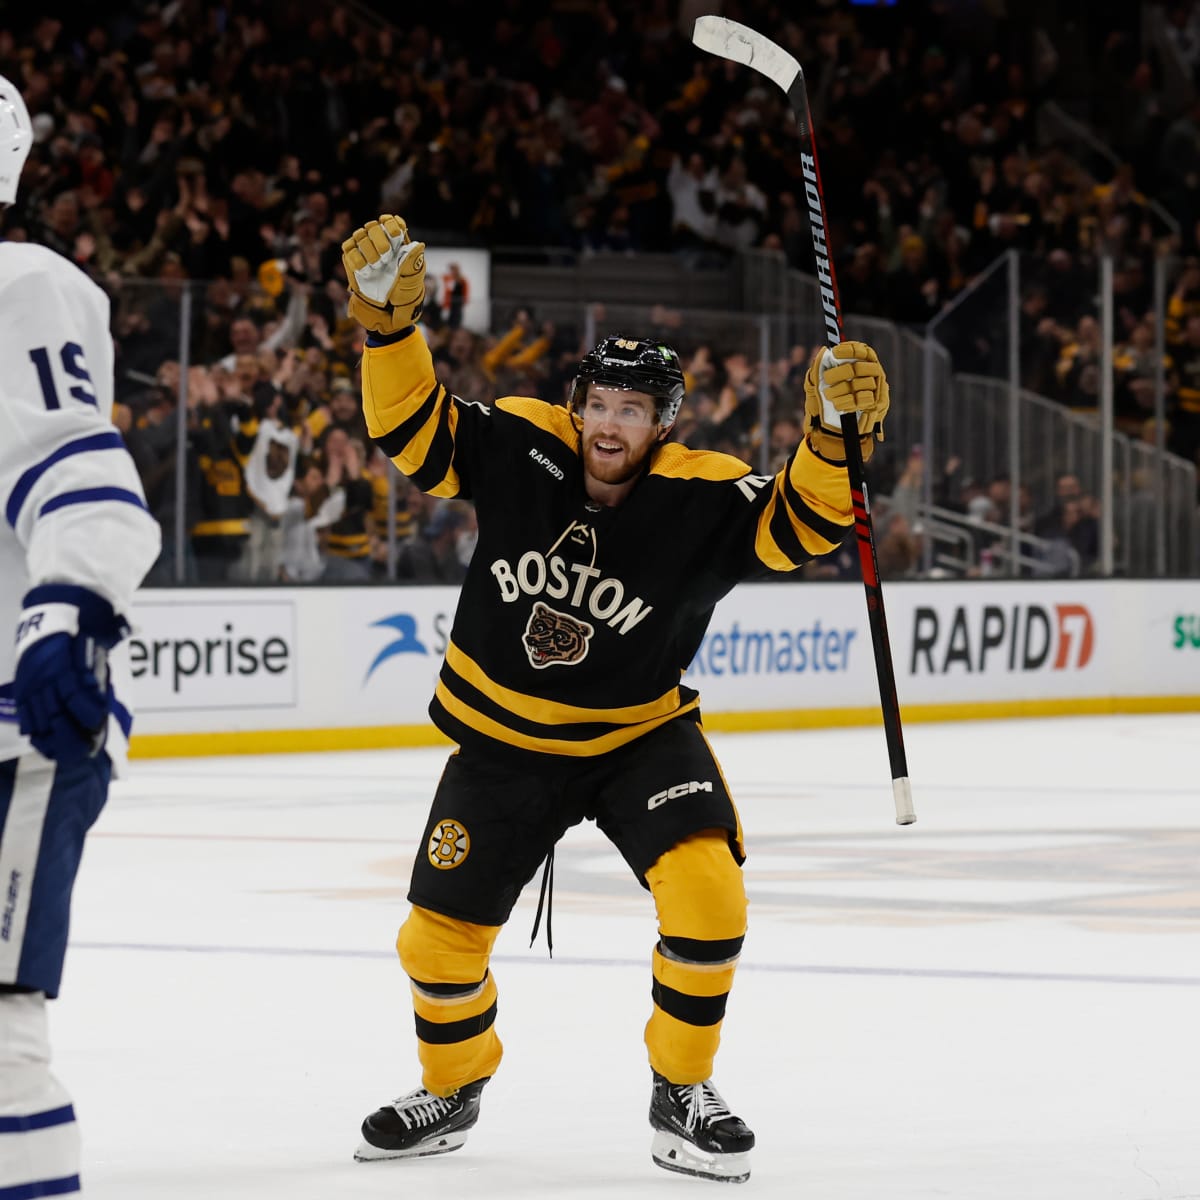 NHL - The Boston Bruins need 20 wins with 26 games remaining to